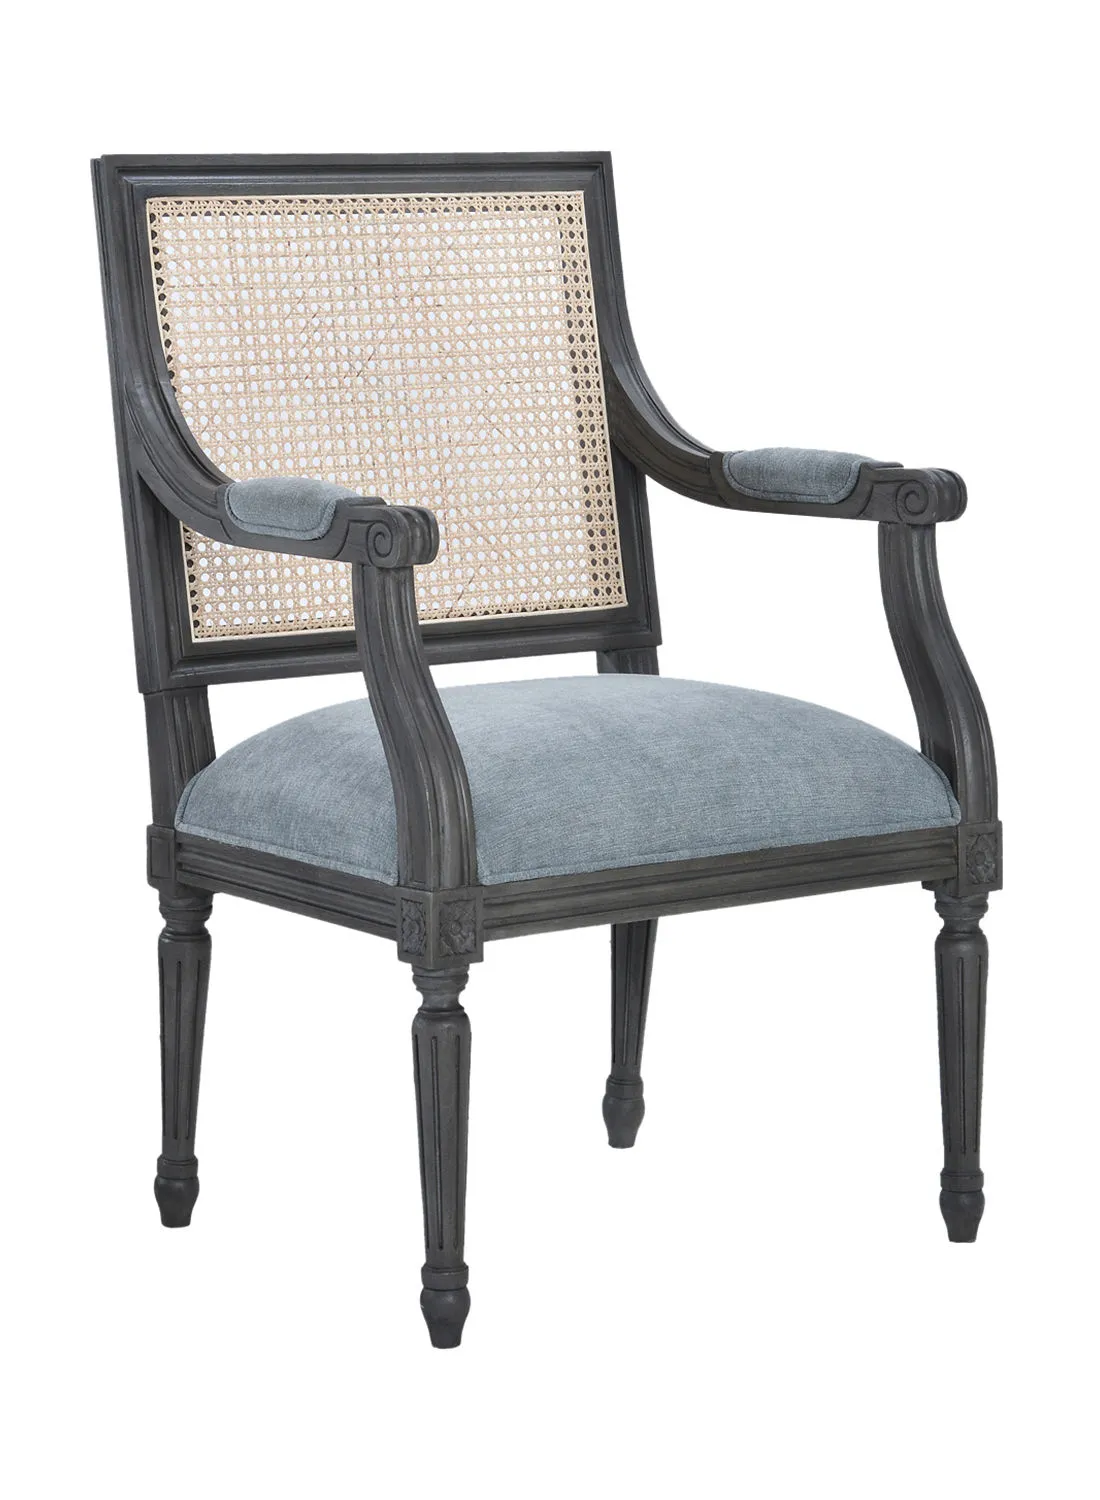 ebb & flow Dining Chair Luxurious - In Oak/Grey Wooden Chair Size 63.5 X 54.5 X 101